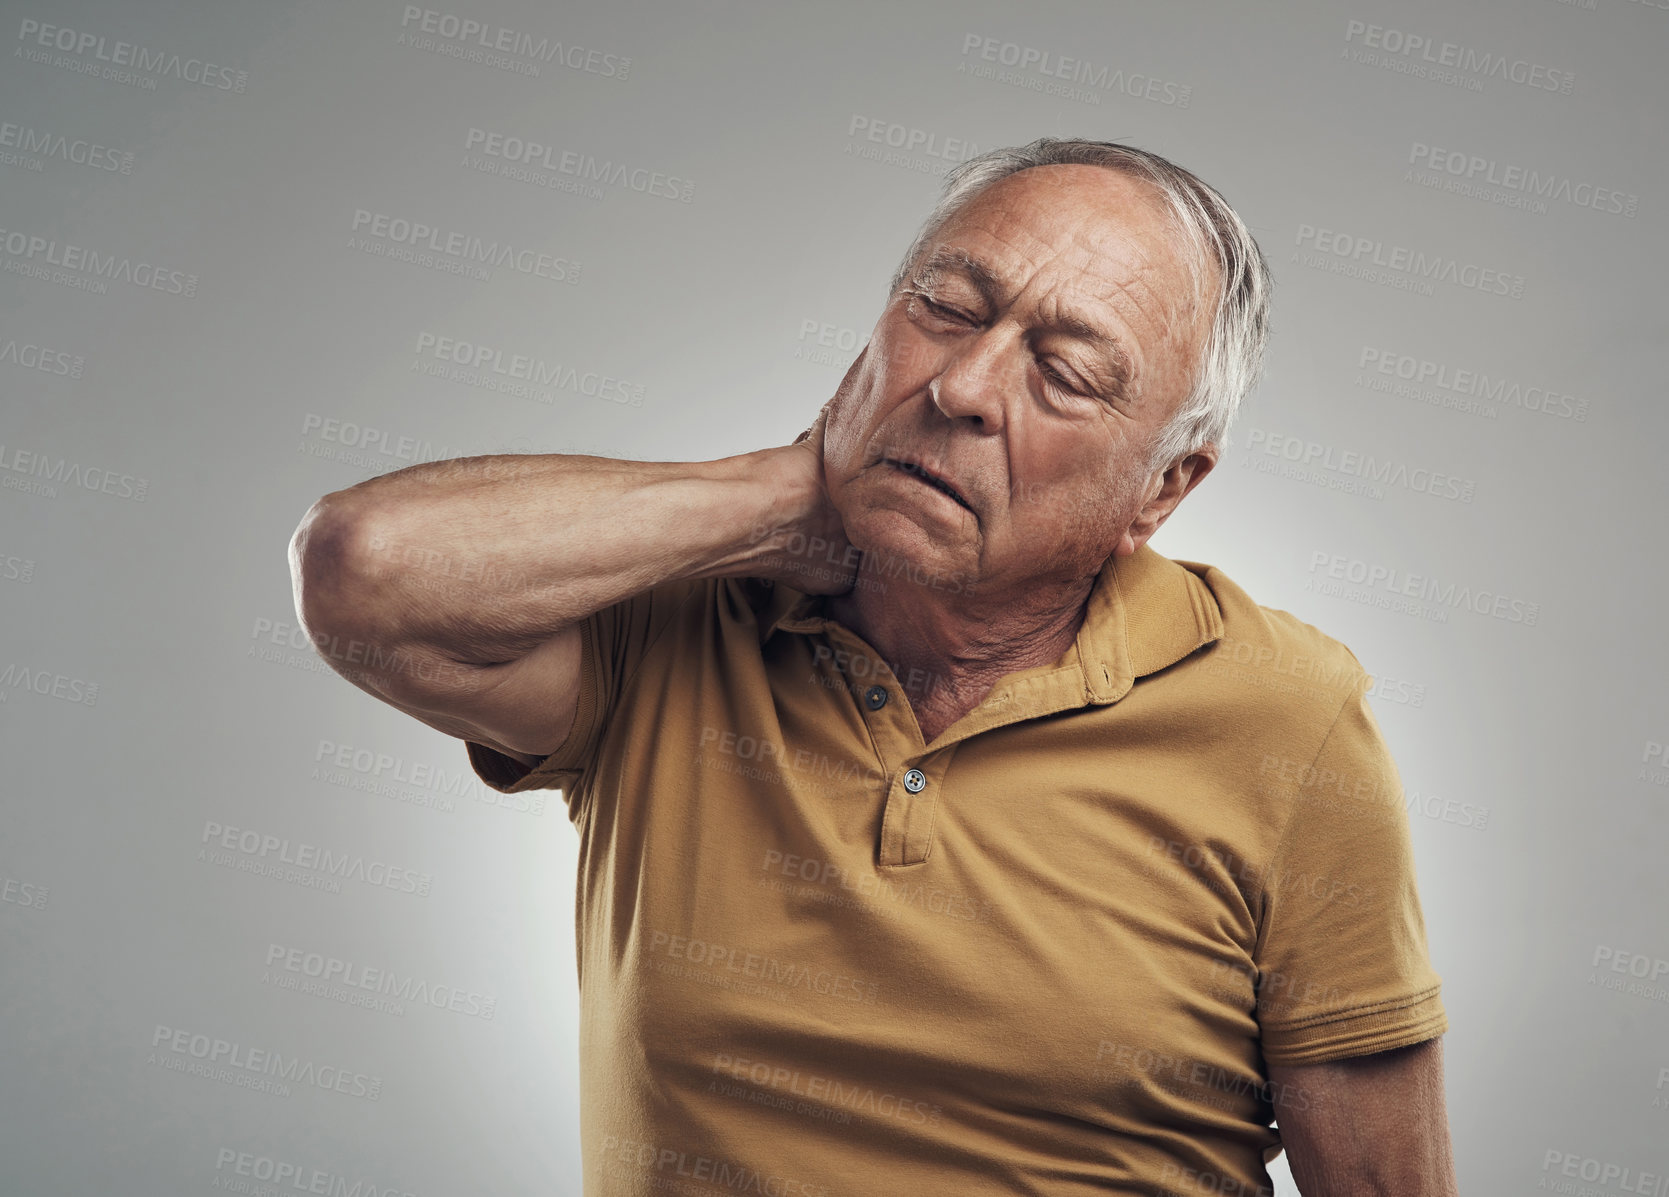 Buy stock photo Studio shot of an elderly man experiencing some pain against a grey background